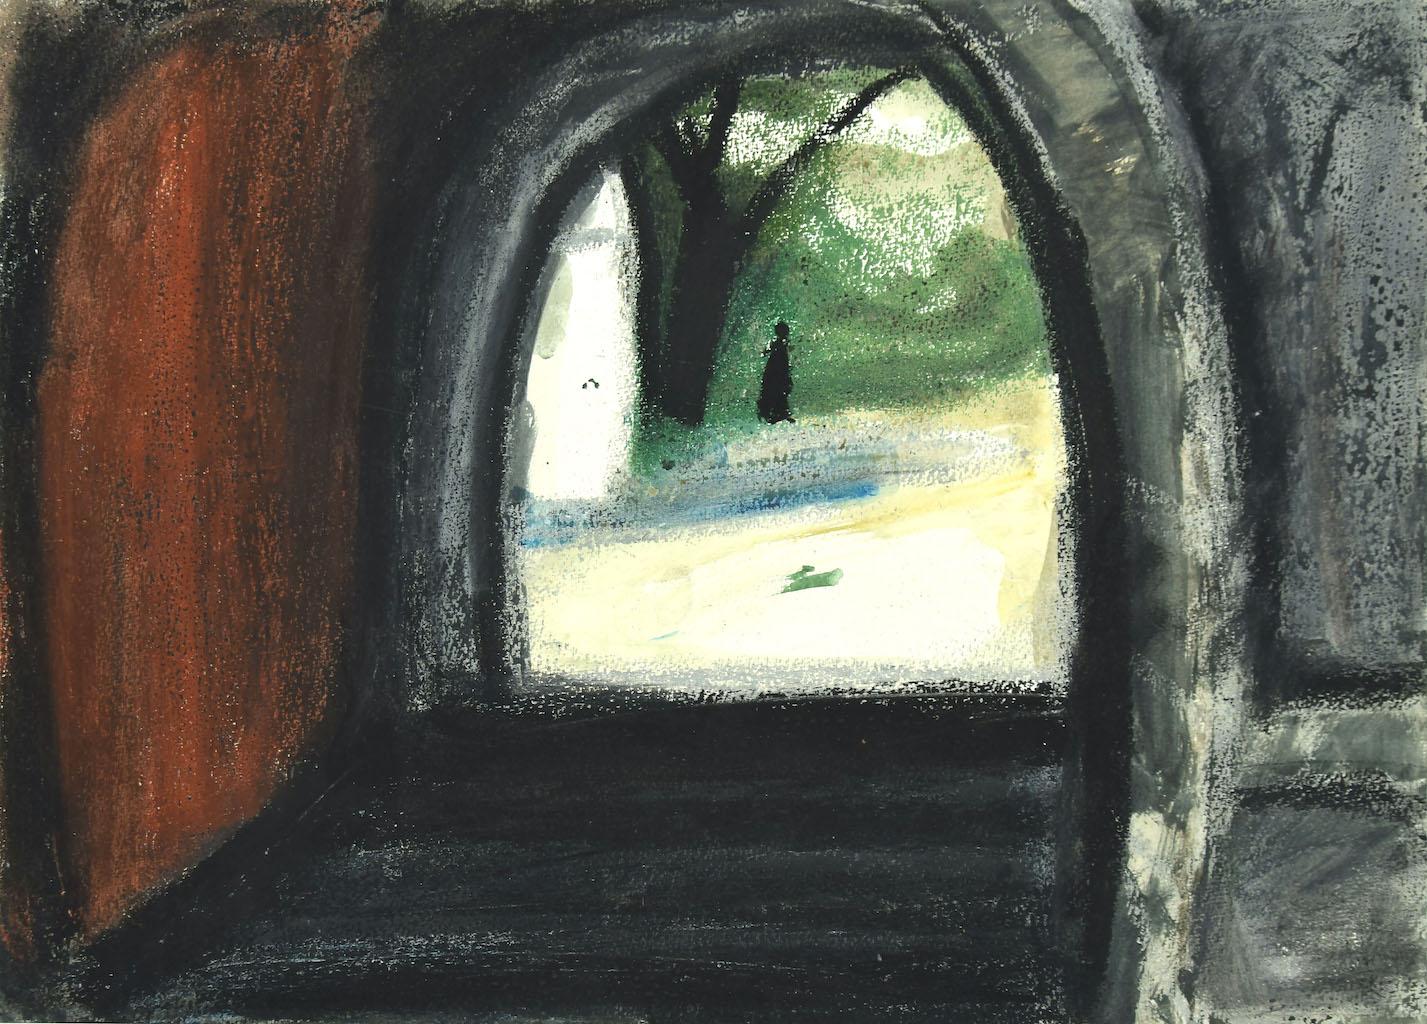 Landscape is an original drawing artwork in mixed media on cardboard, charcoal and oil pastel, realized by Sun Jingyuan in 1970.
The state of preservation is very good.

Sheet dimension: 54.5 x 39.5 cm.

The artwork represents a beautiful landscape